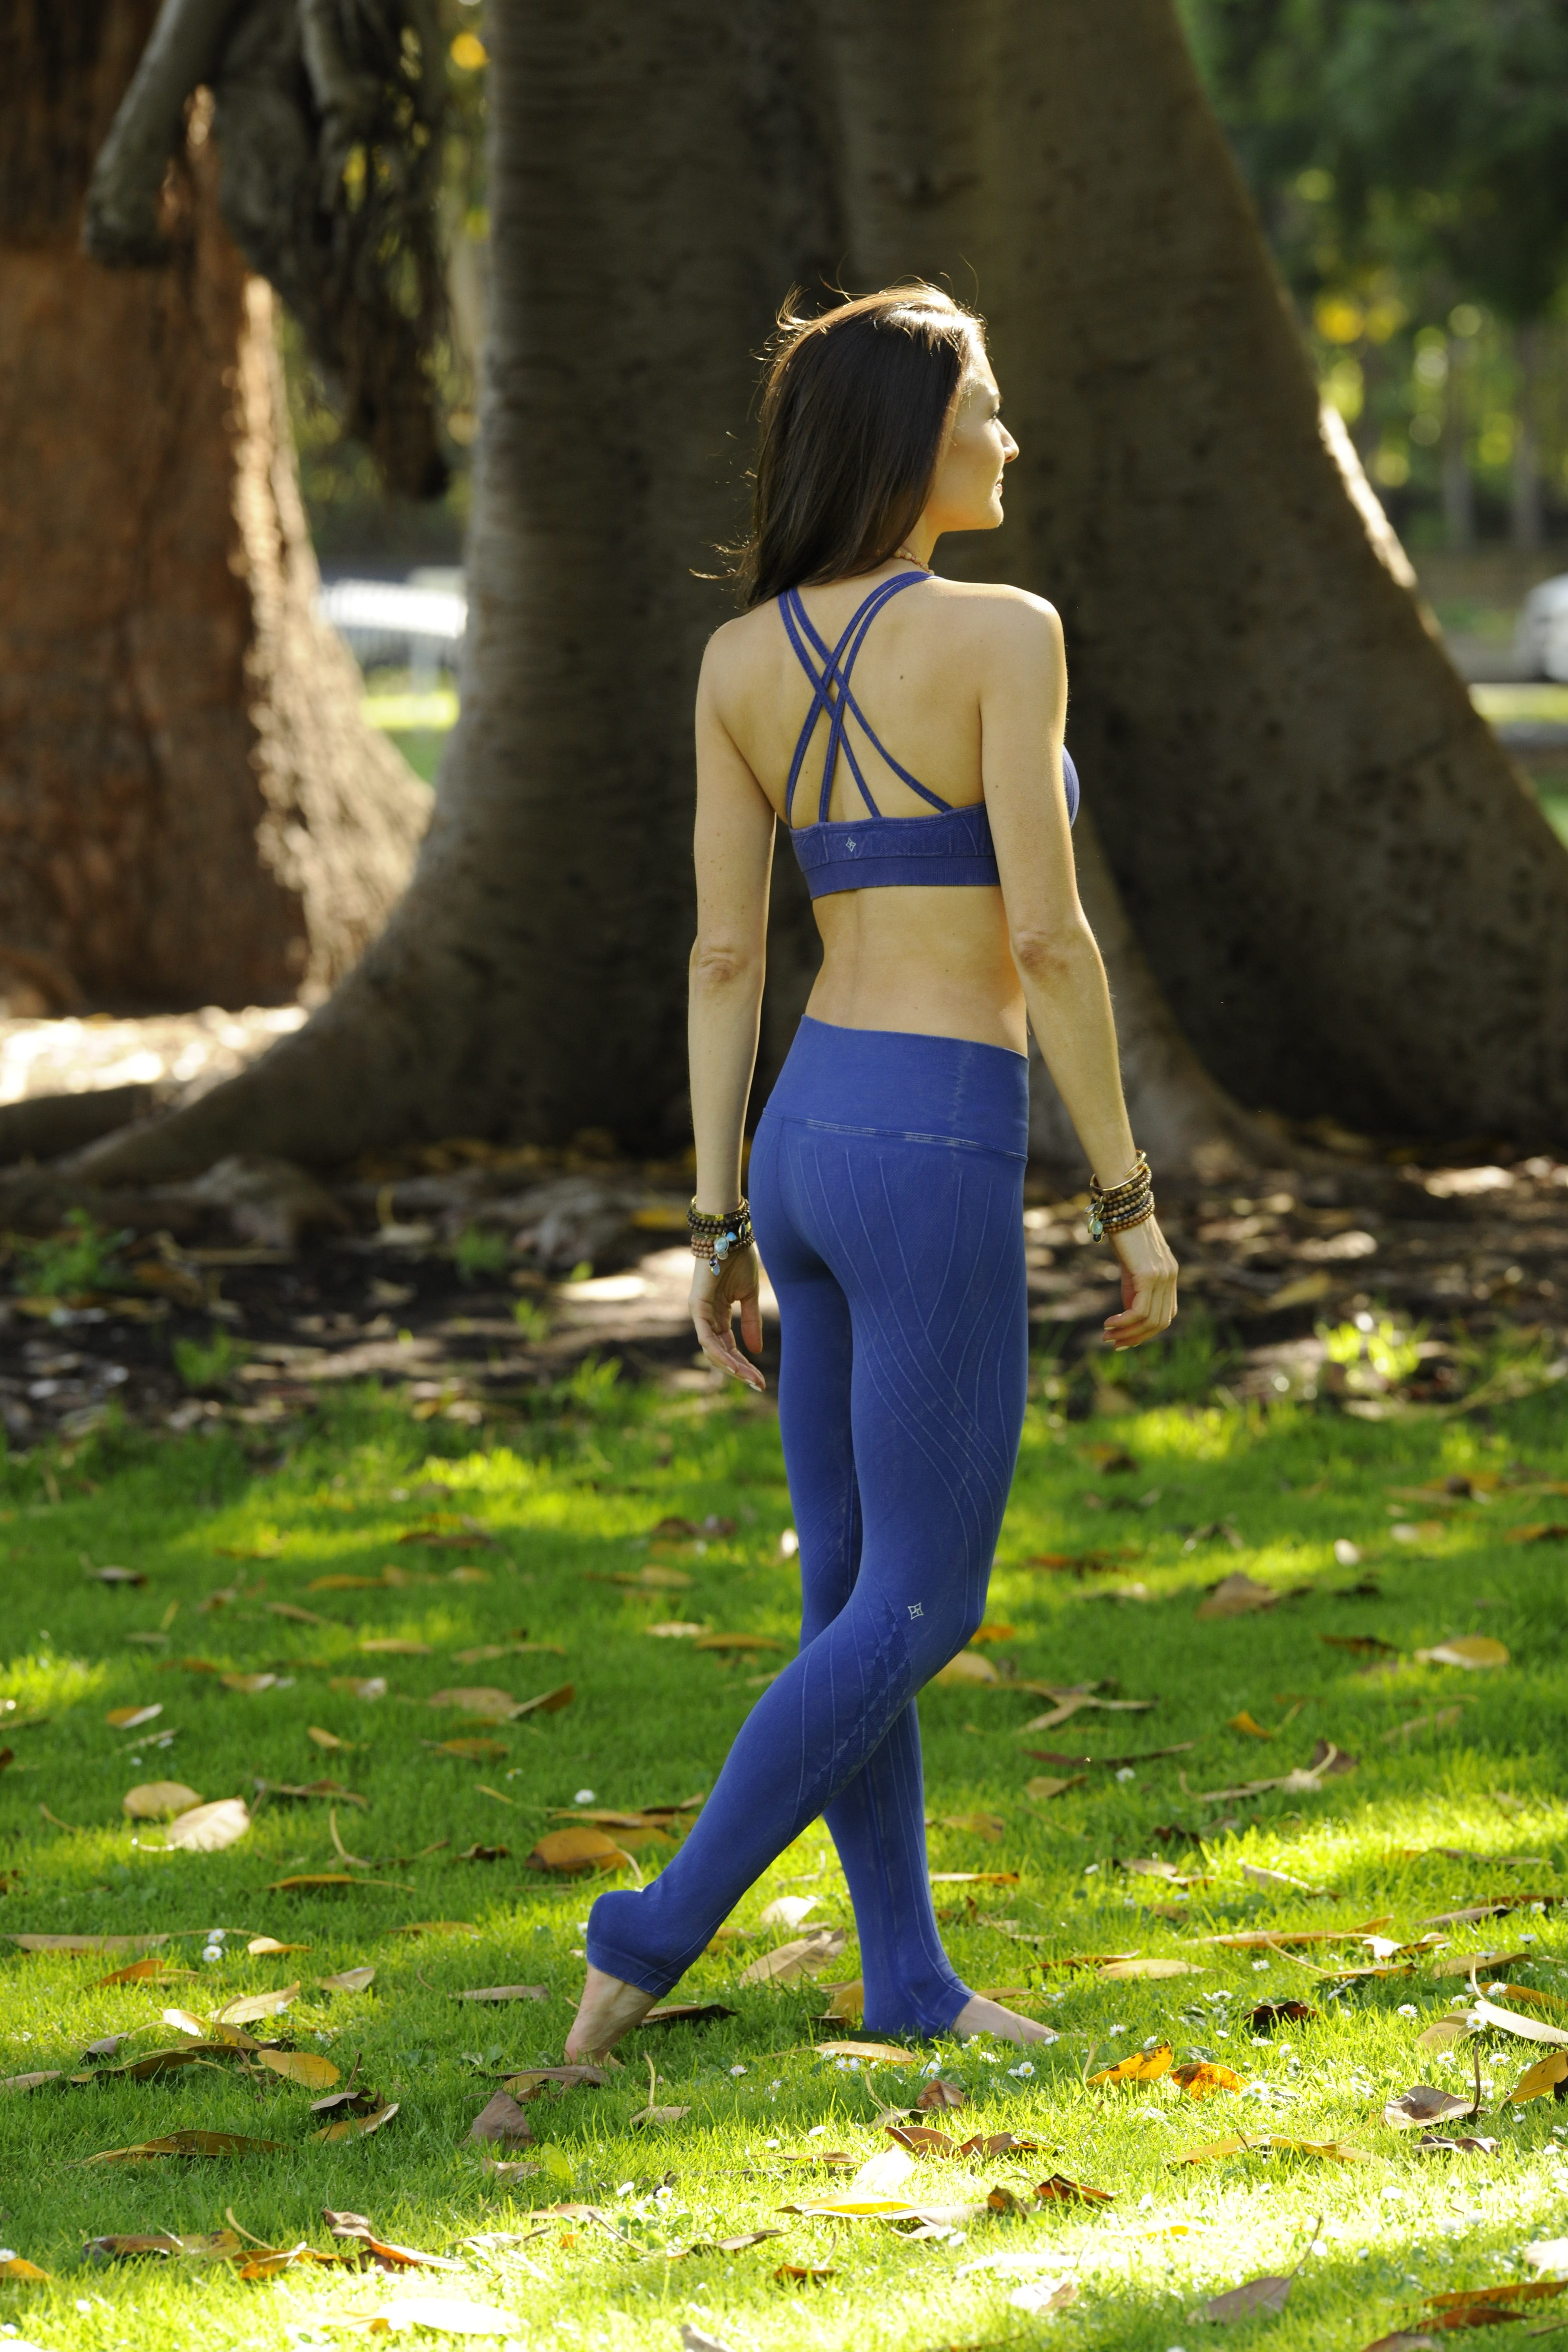 Workout Wear That's Functional, Fashionable and Soaks Up Your